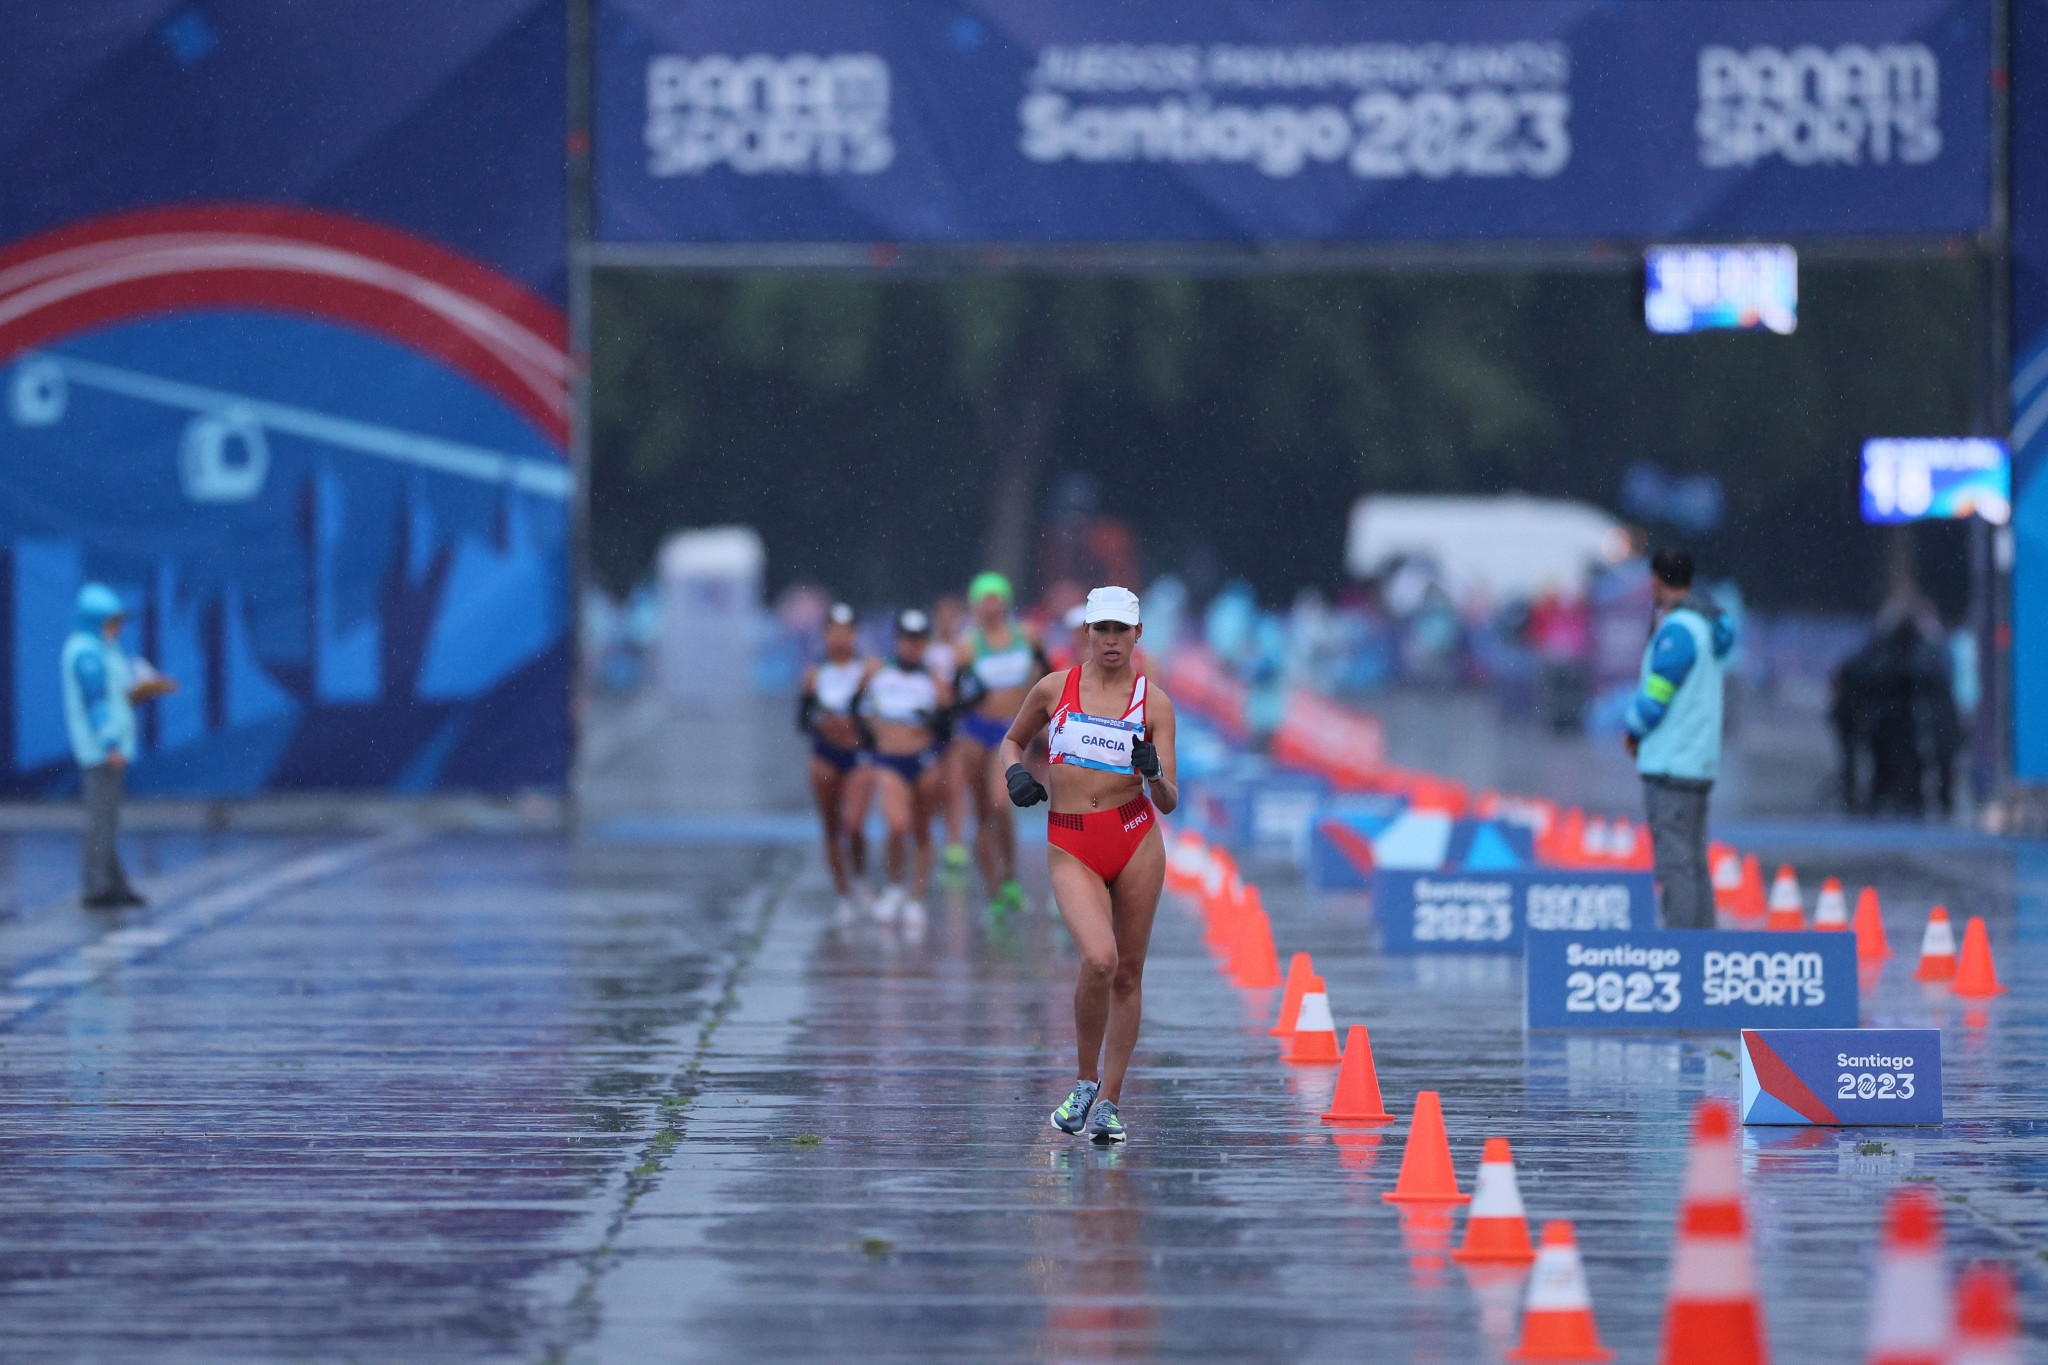 Peru's Kimberly García crossed the line in the women's 20km race walk at Santiago 2023 in a time more than 11 minutes faster than the world record before it was remeasured  ©Getty Images